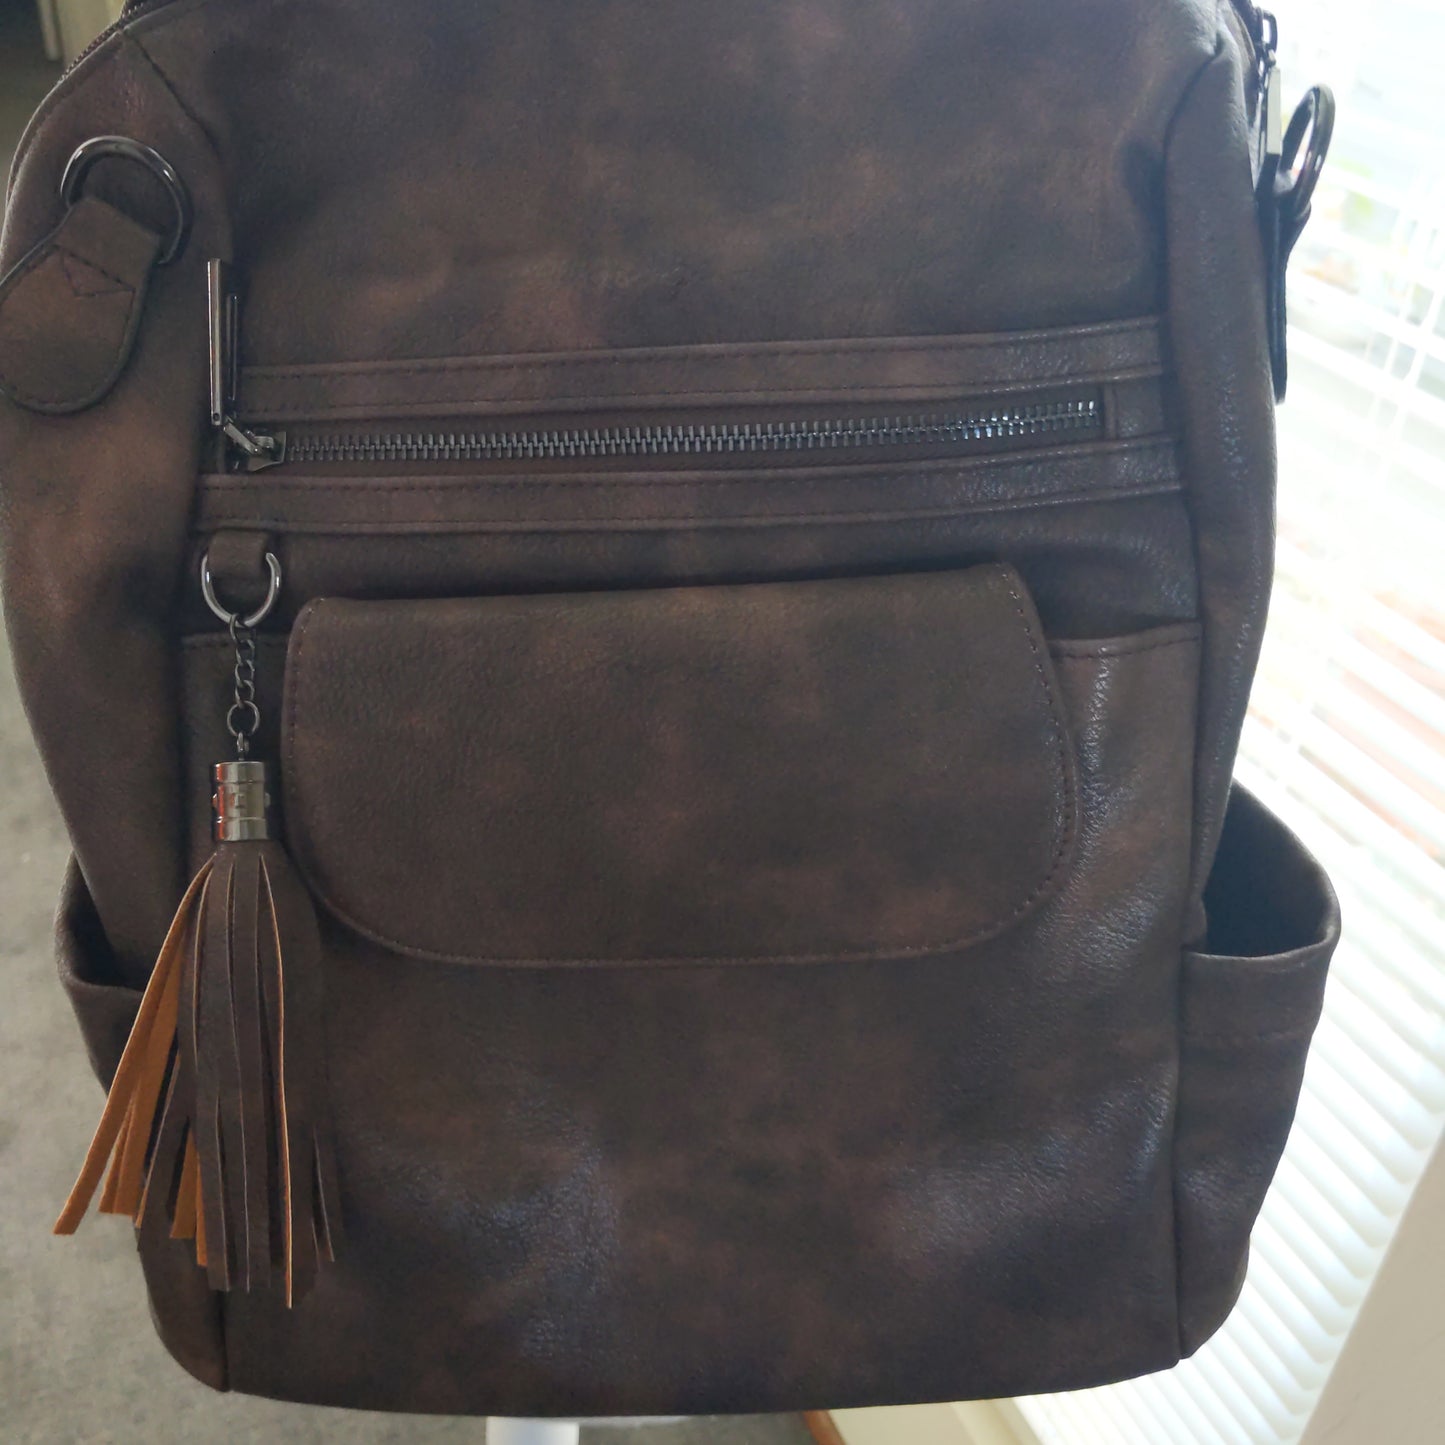 Opage Brown Leather Backpack Purse